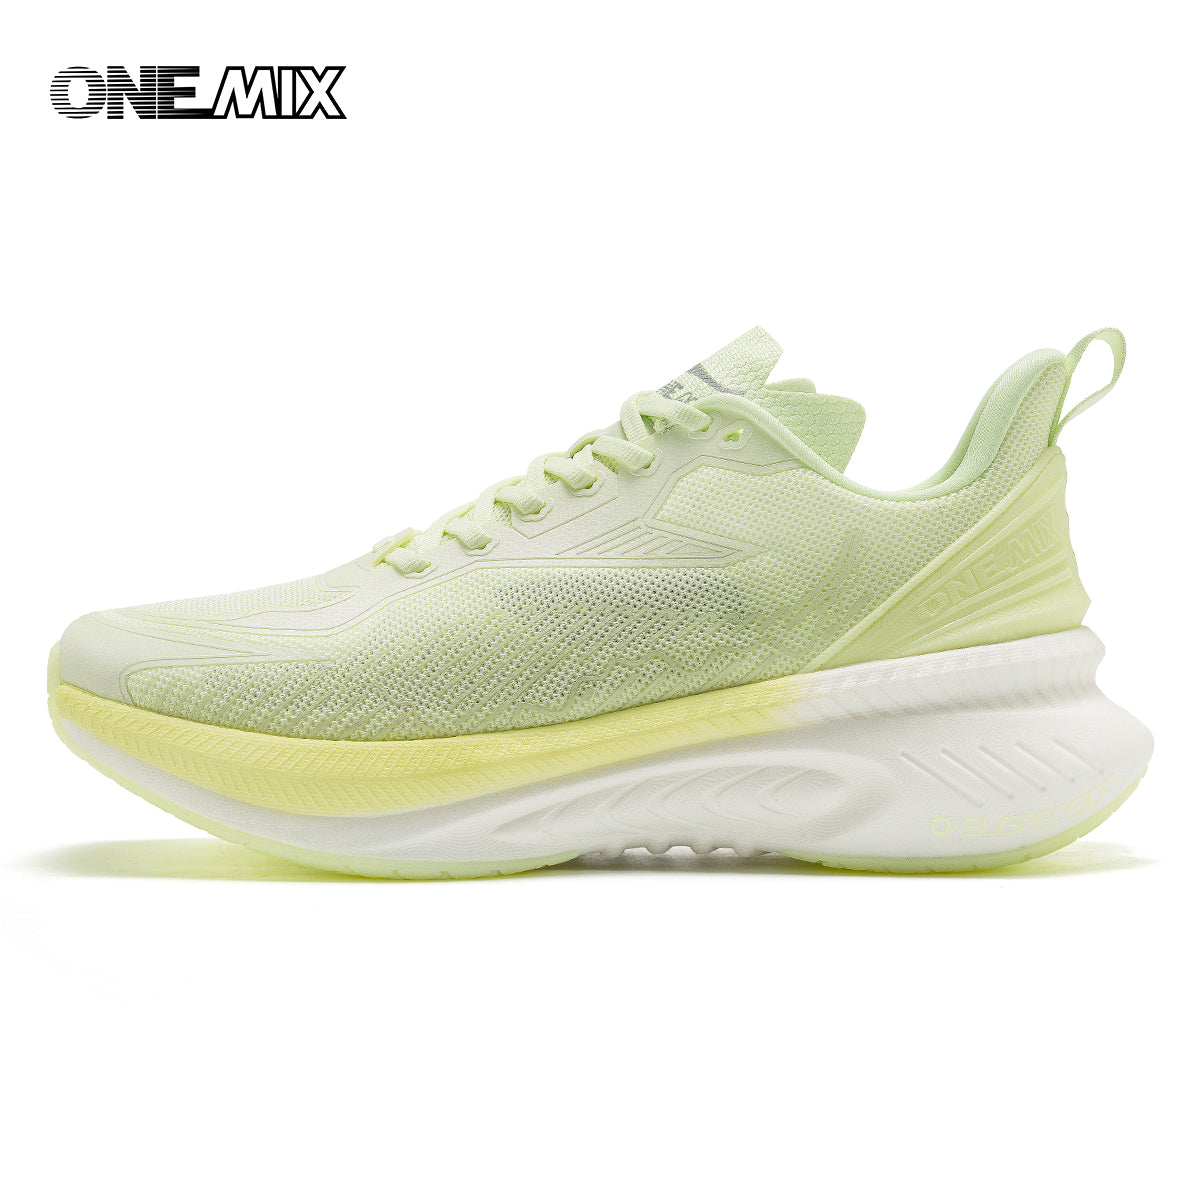 ONEMIX Breathable Carbon Plate Marathon Running Racing Shoes Stable Support Shock-relief Ultra-light Rebound Sport Sneakers